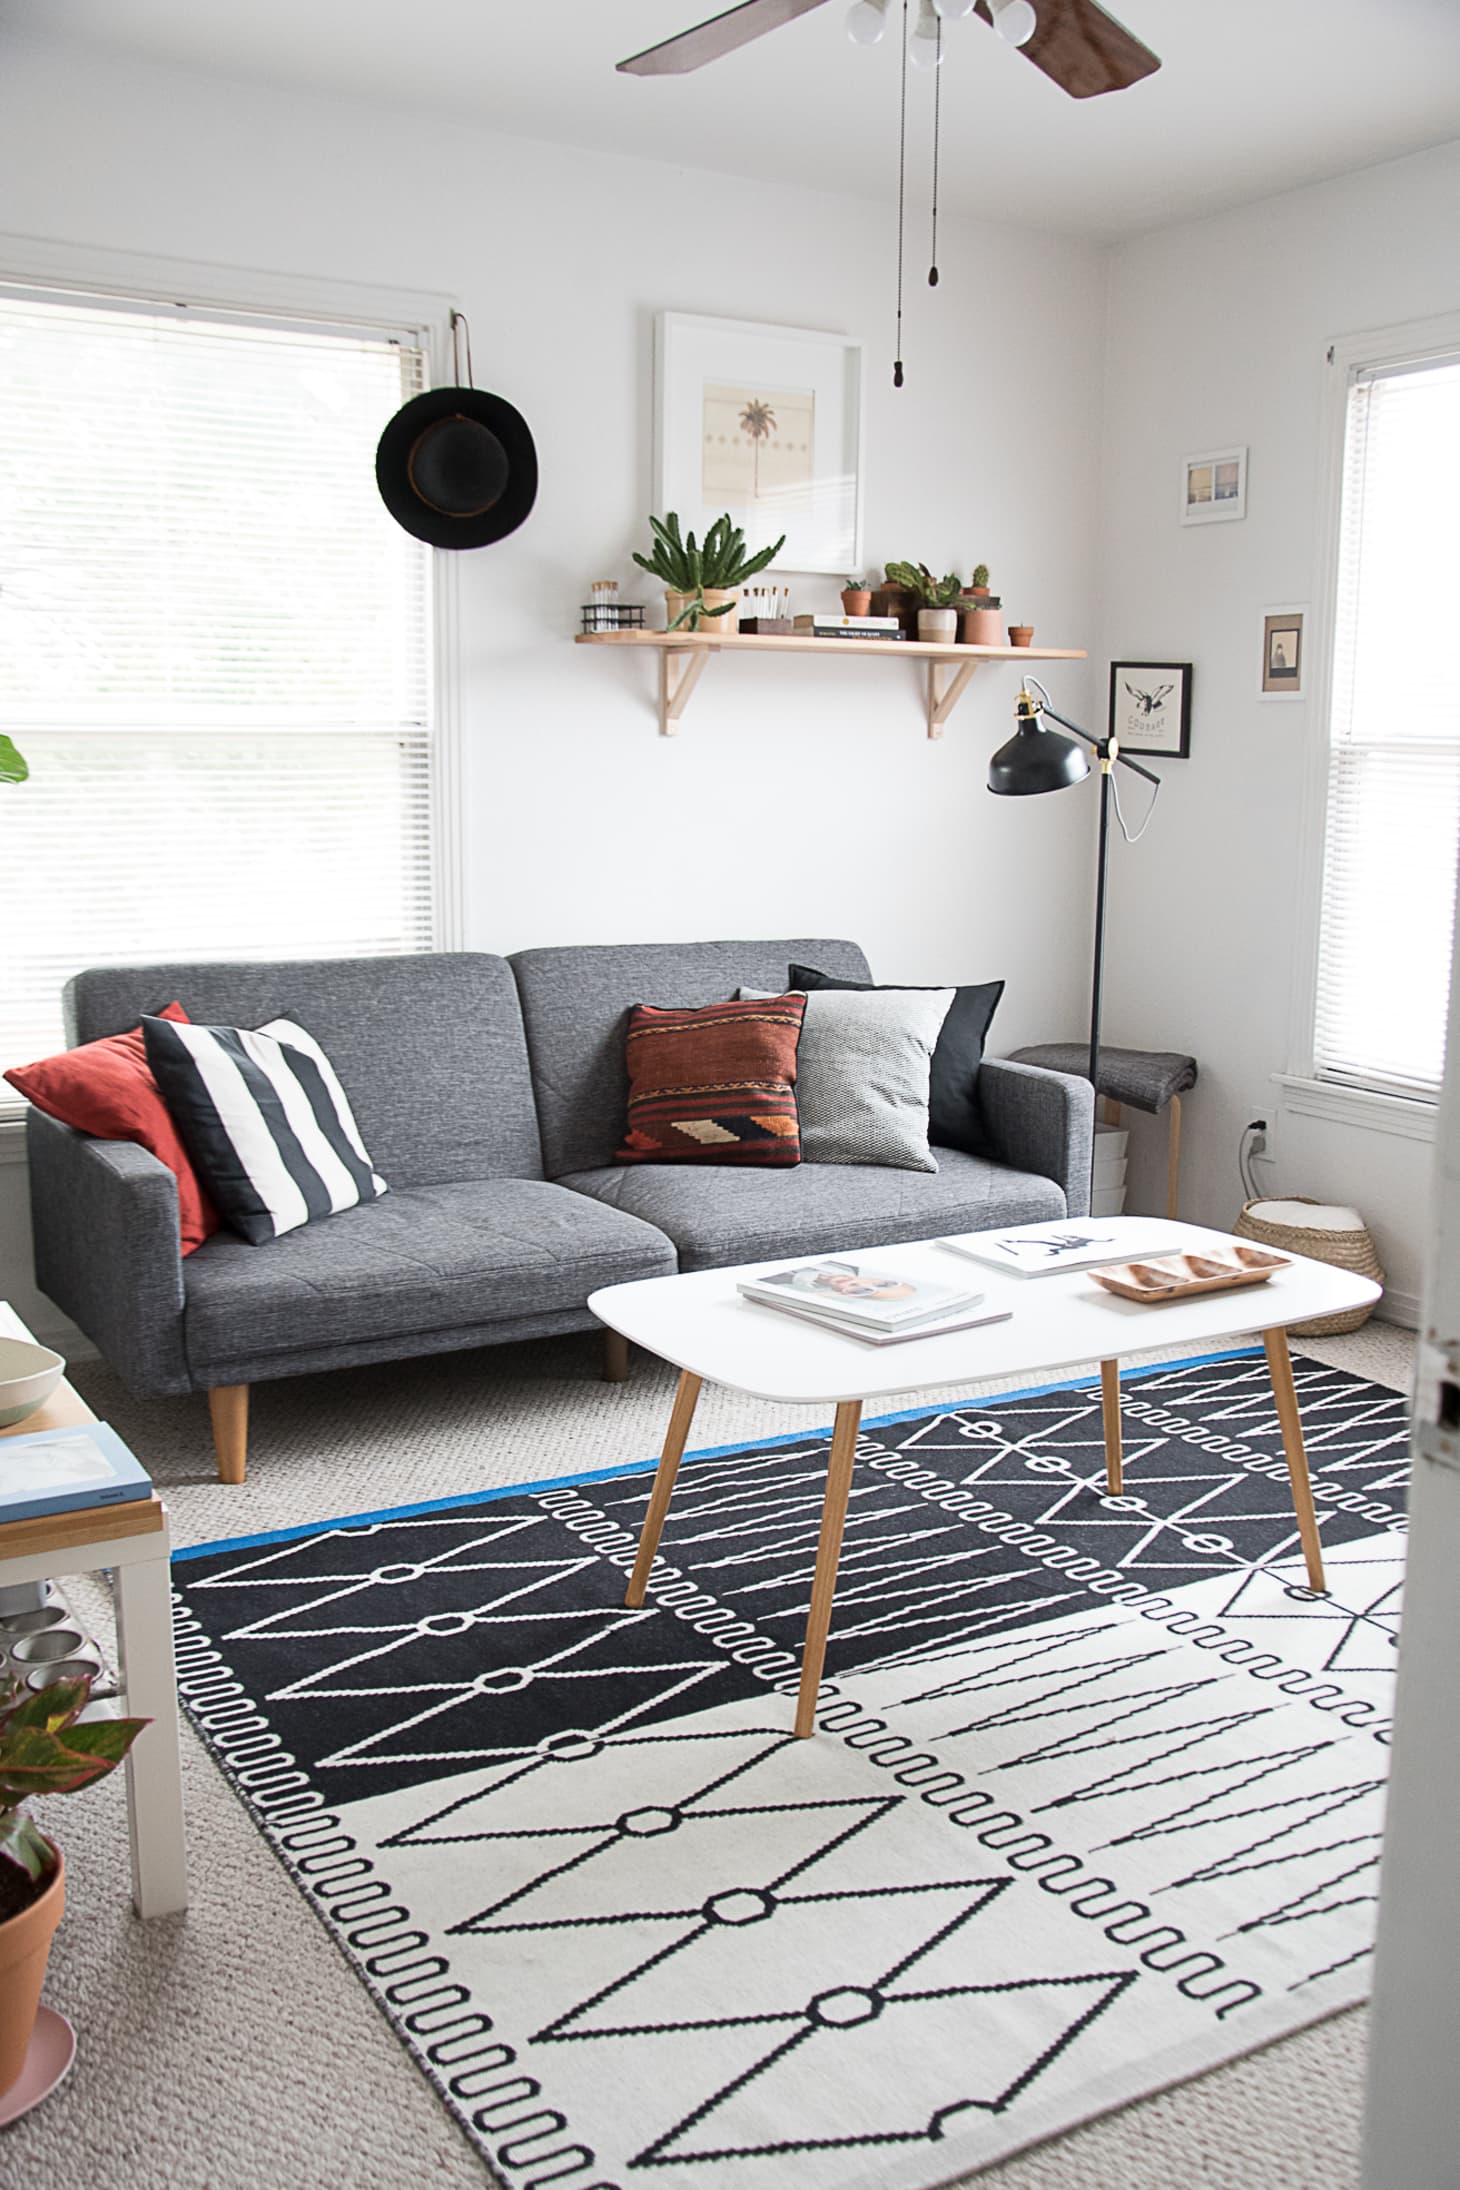 Decorate Small Living Room: Create A Big Impact In A Small Space